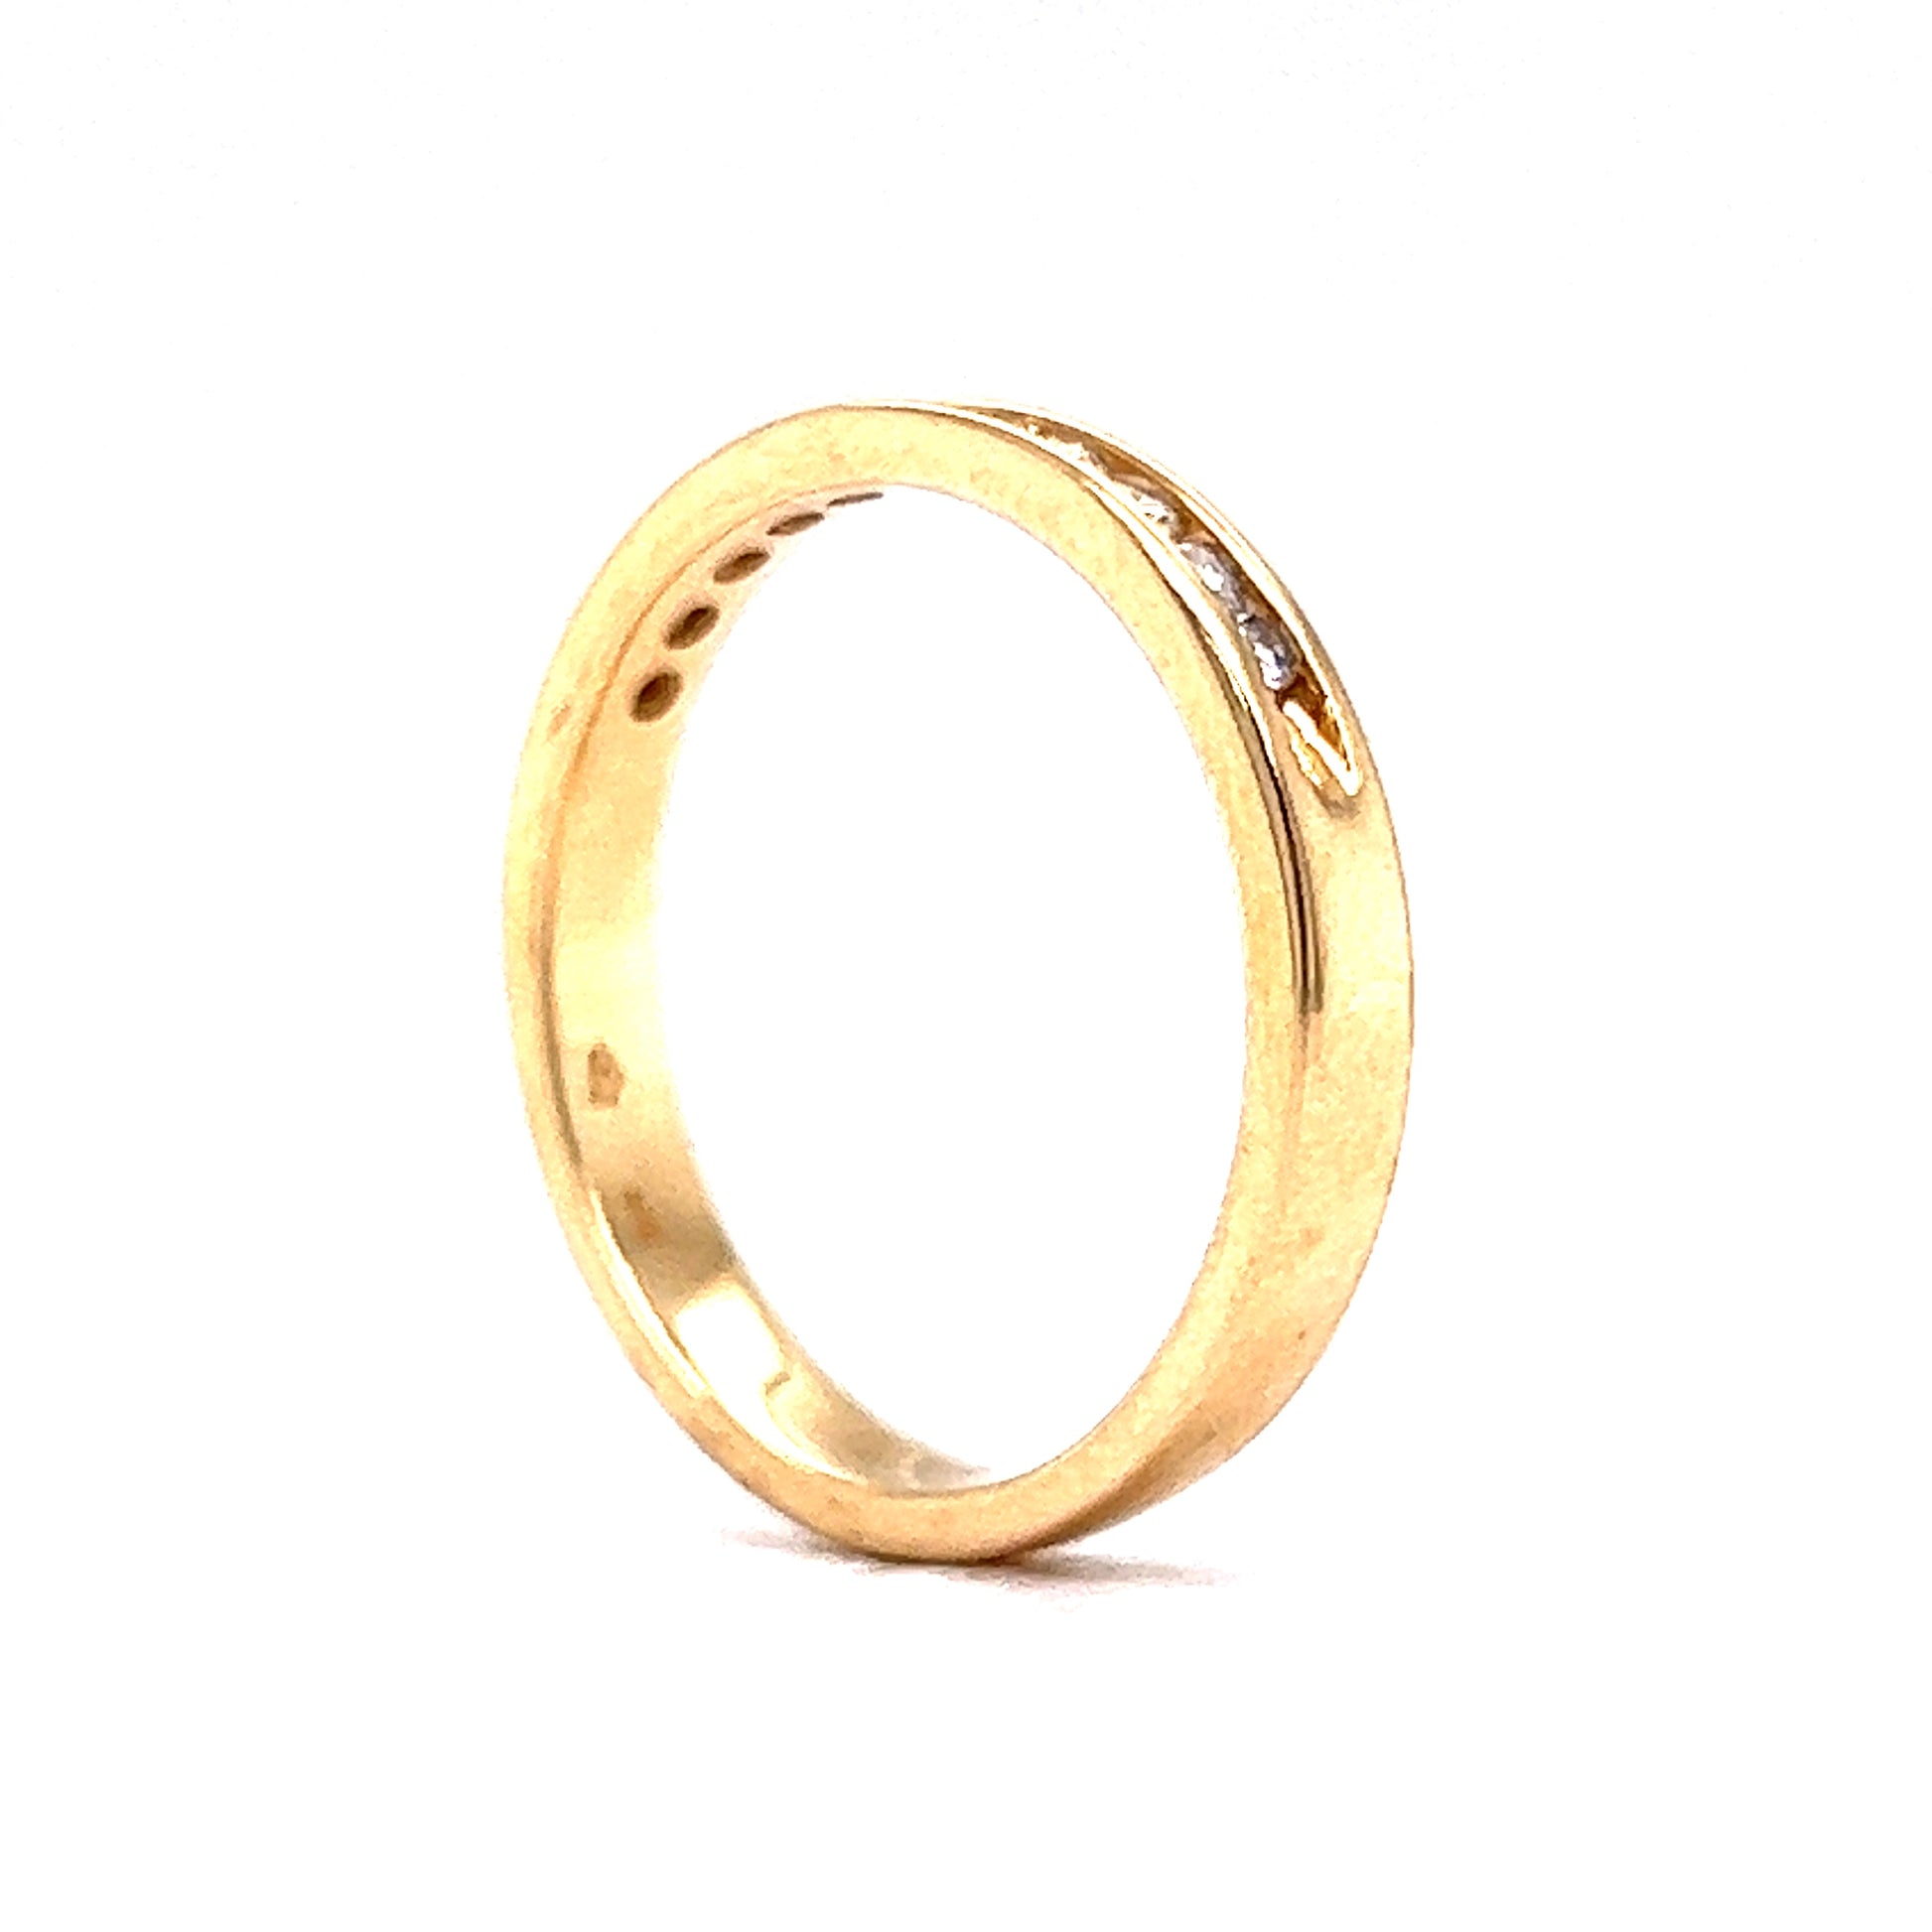 .22 Channel Set Diamond Wedding Band in 14k Yellow GoldComposition: 14 Karat Yellow Gold Ring Size: 7 Total Diamond Weight: .22ct Total Gram Weight: 2.9 g Inscription: 14k
      